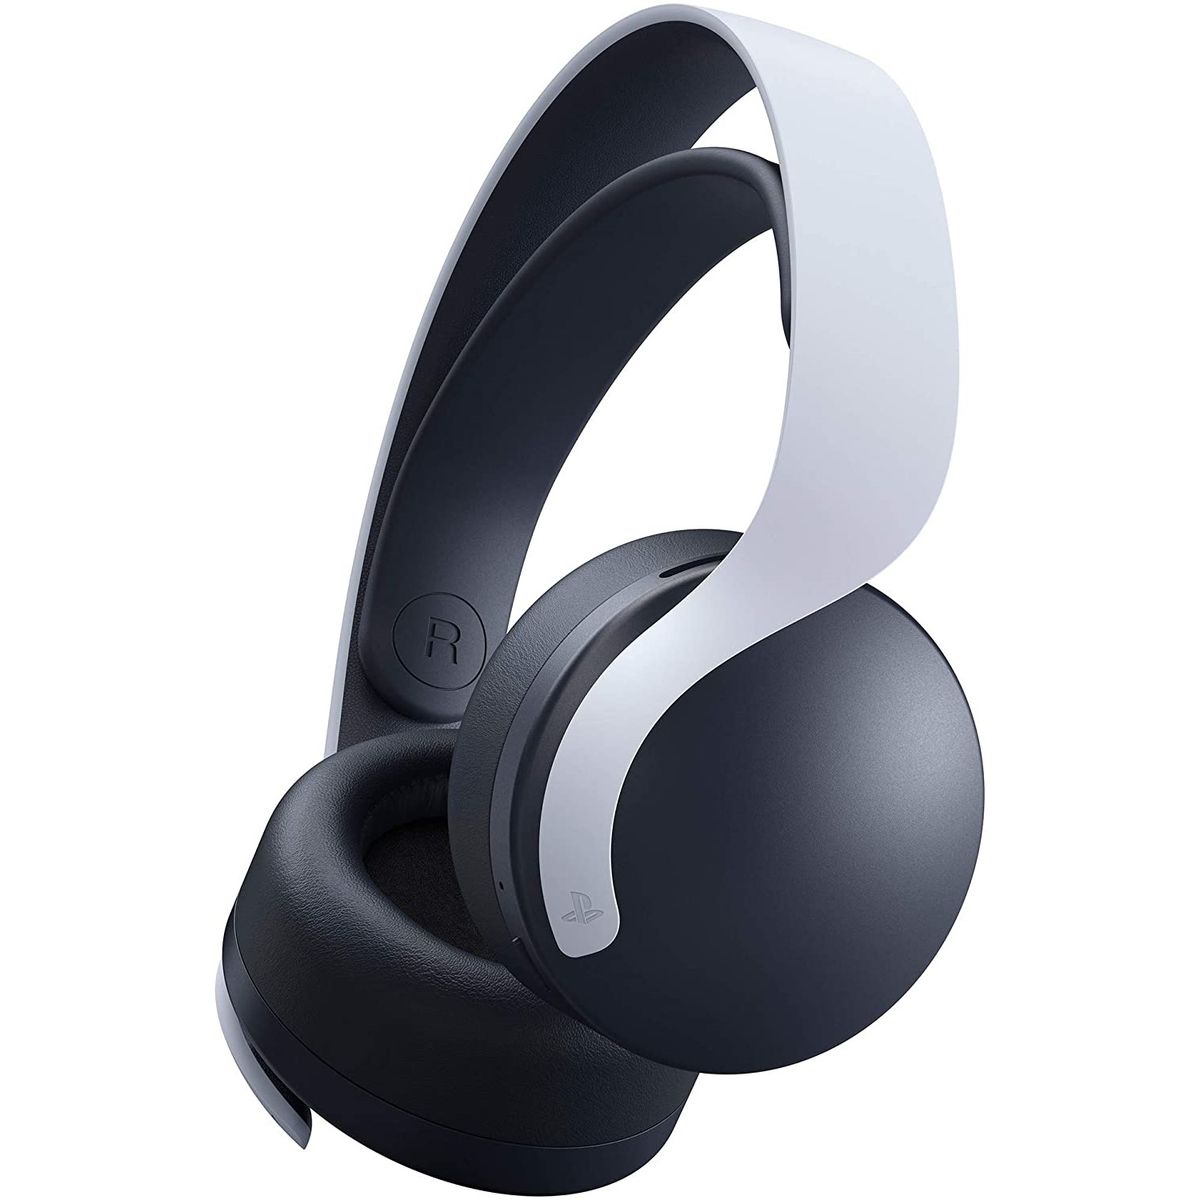 pulse 3d wireless headset price in india